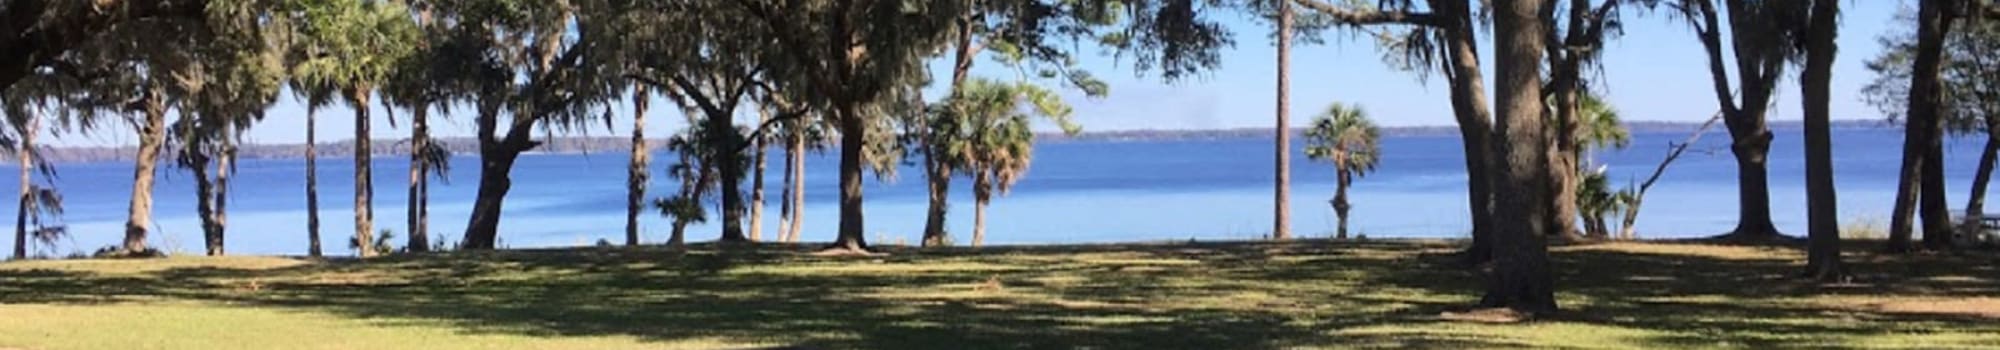 Amenities at St. Johns Landing Apartments in Green Cove Springs, Florida